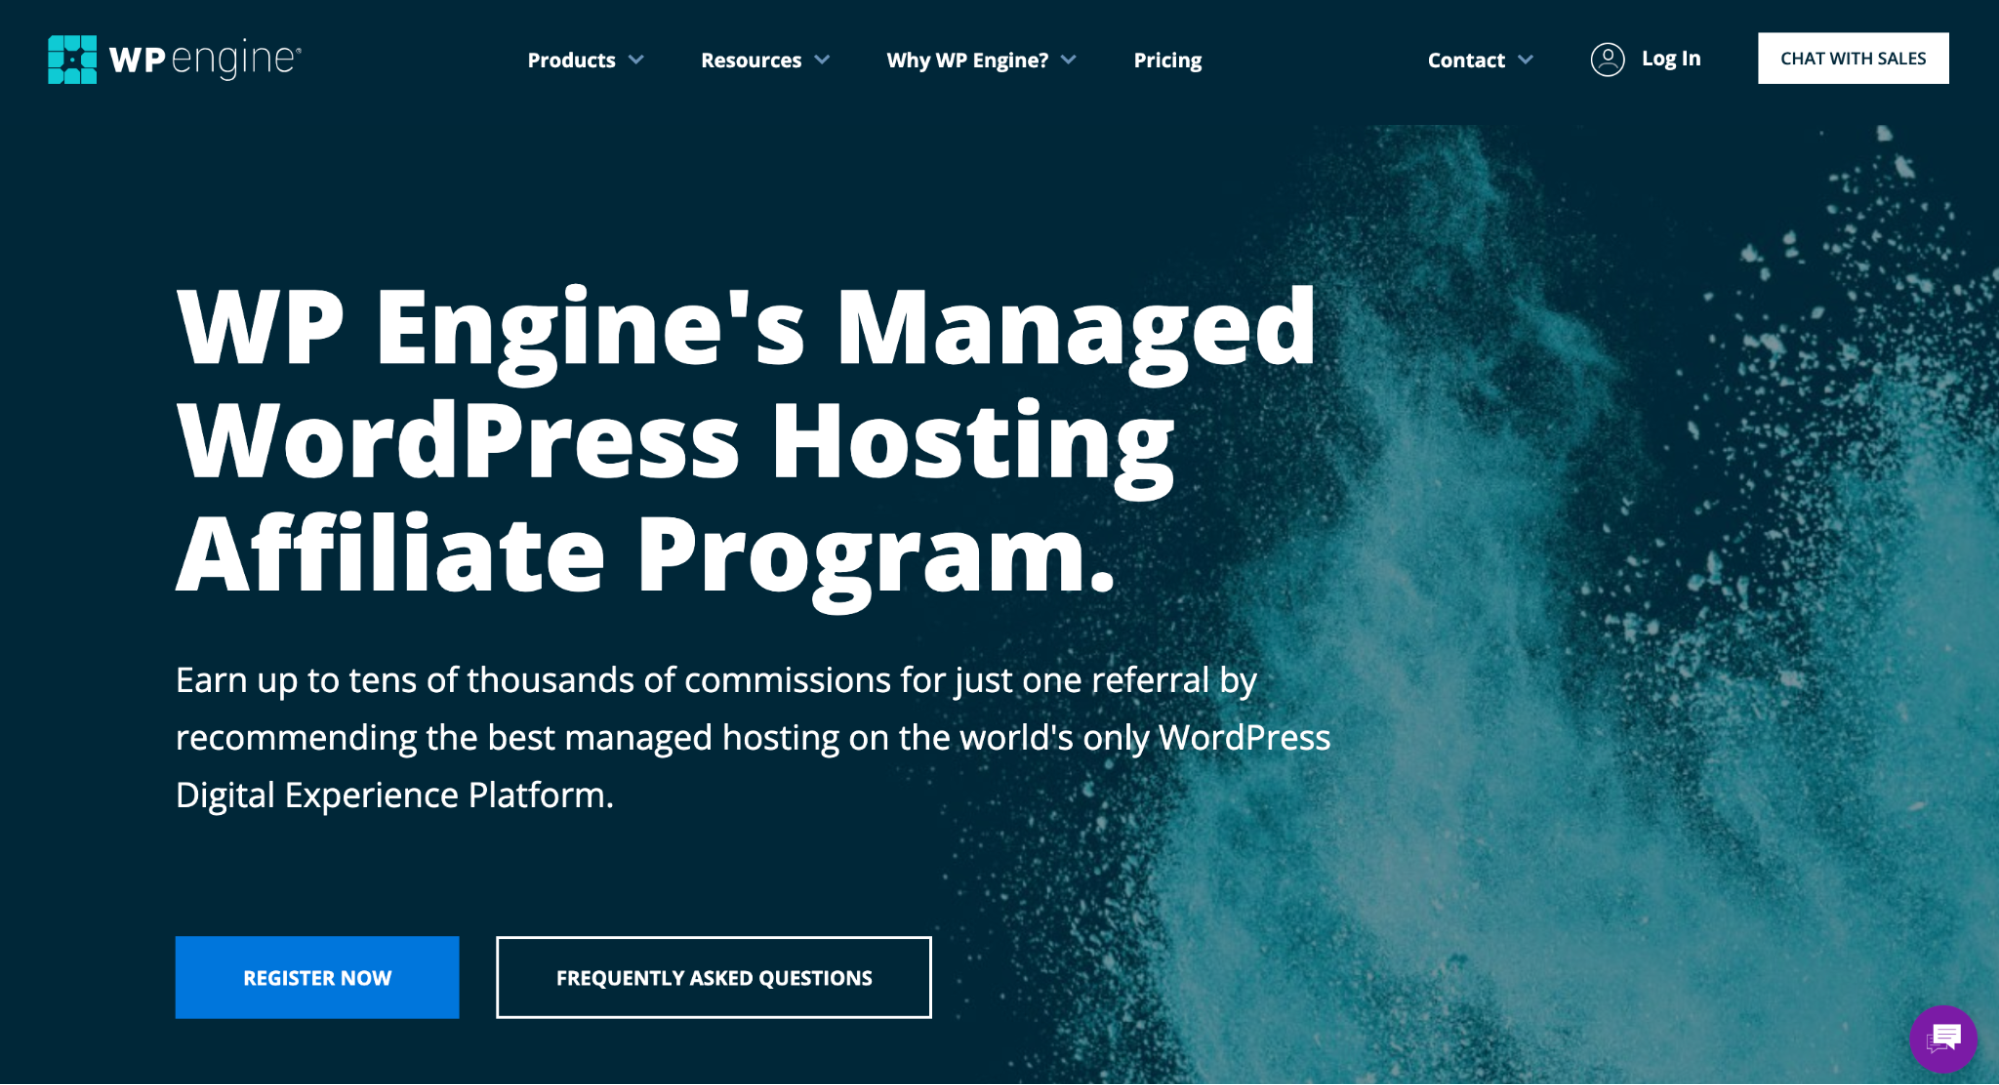 WP Engine affiliate program page, with a button to sign up.